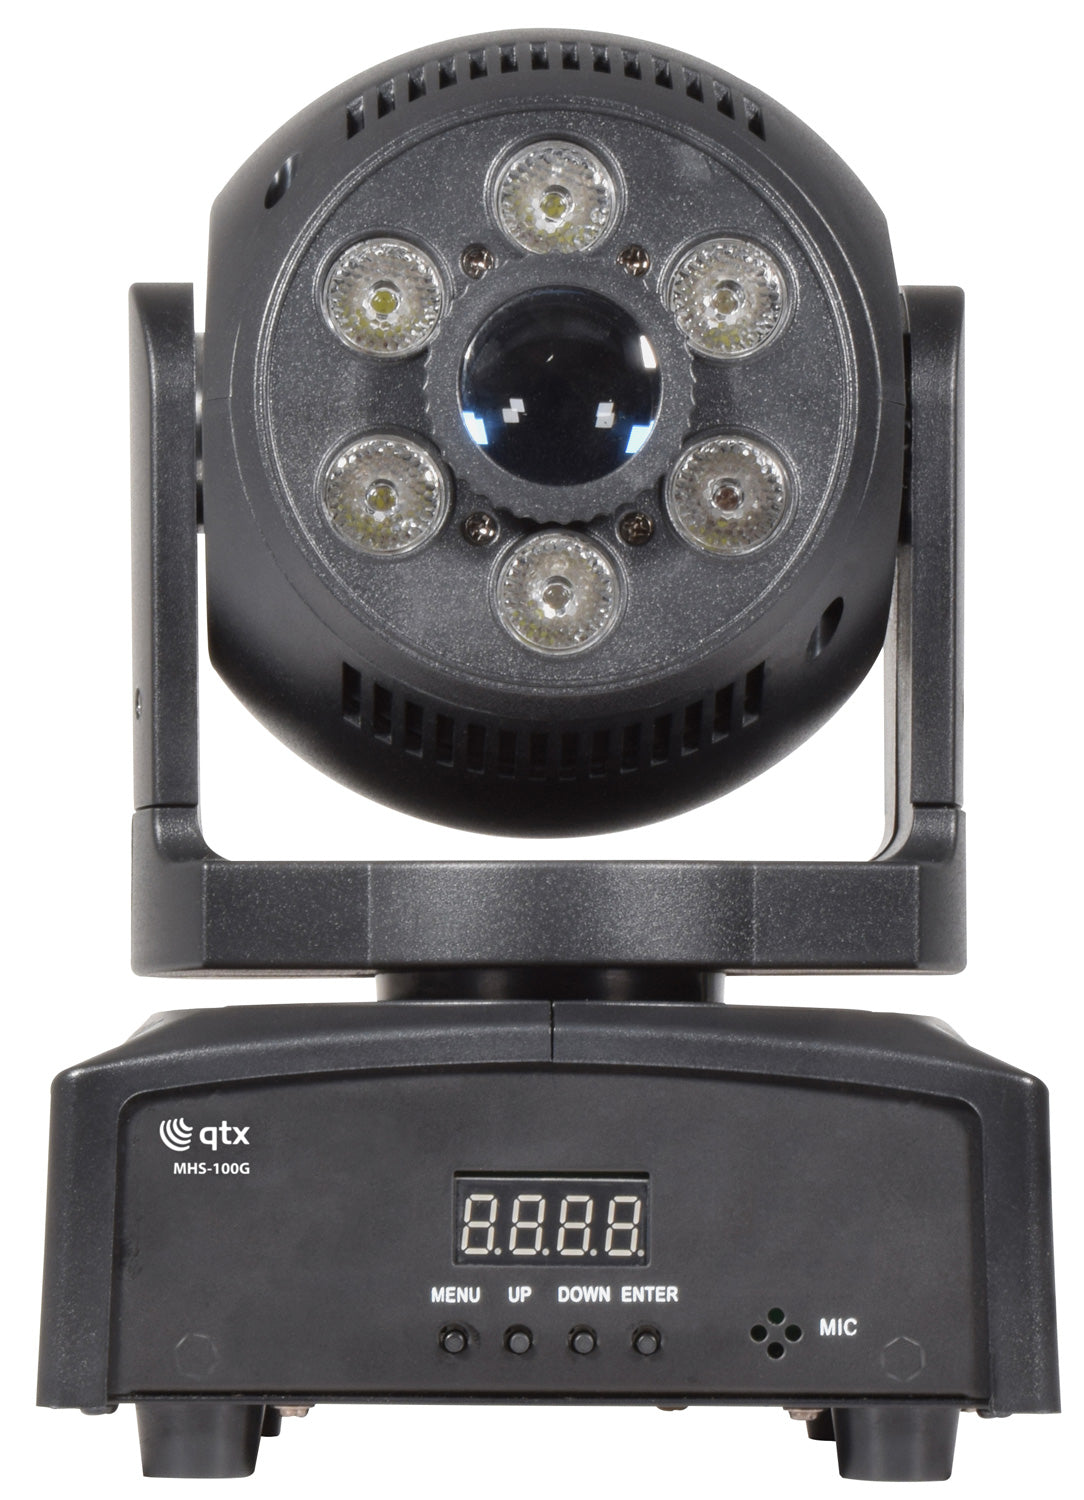 QTX MHS-100G - 100W Spot-Wash LED Moving Head with GOBOs (150457)